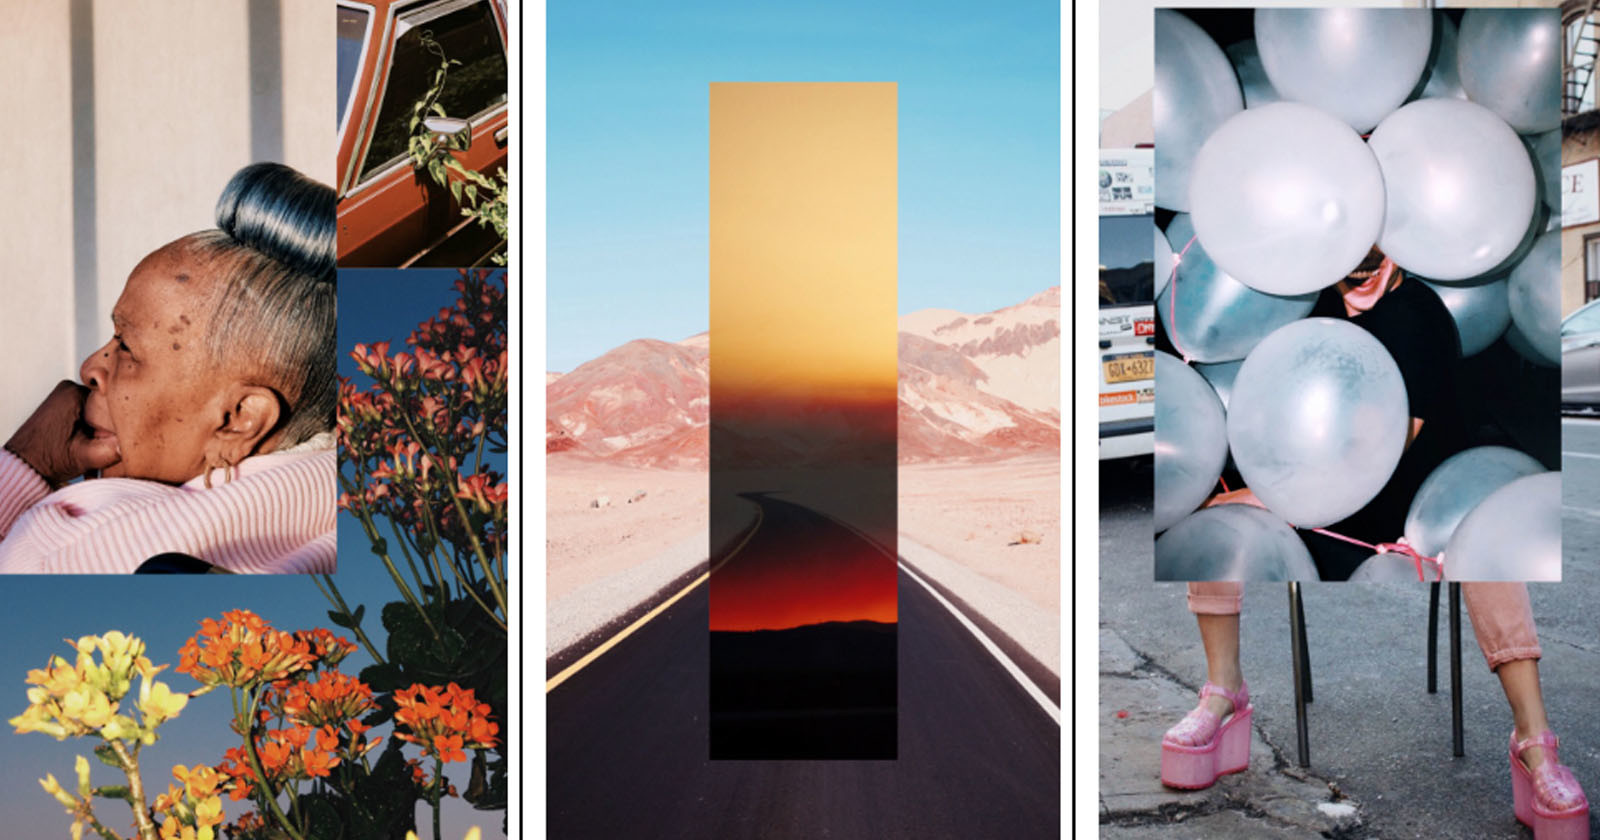  vsco collage feature allows mixed media 